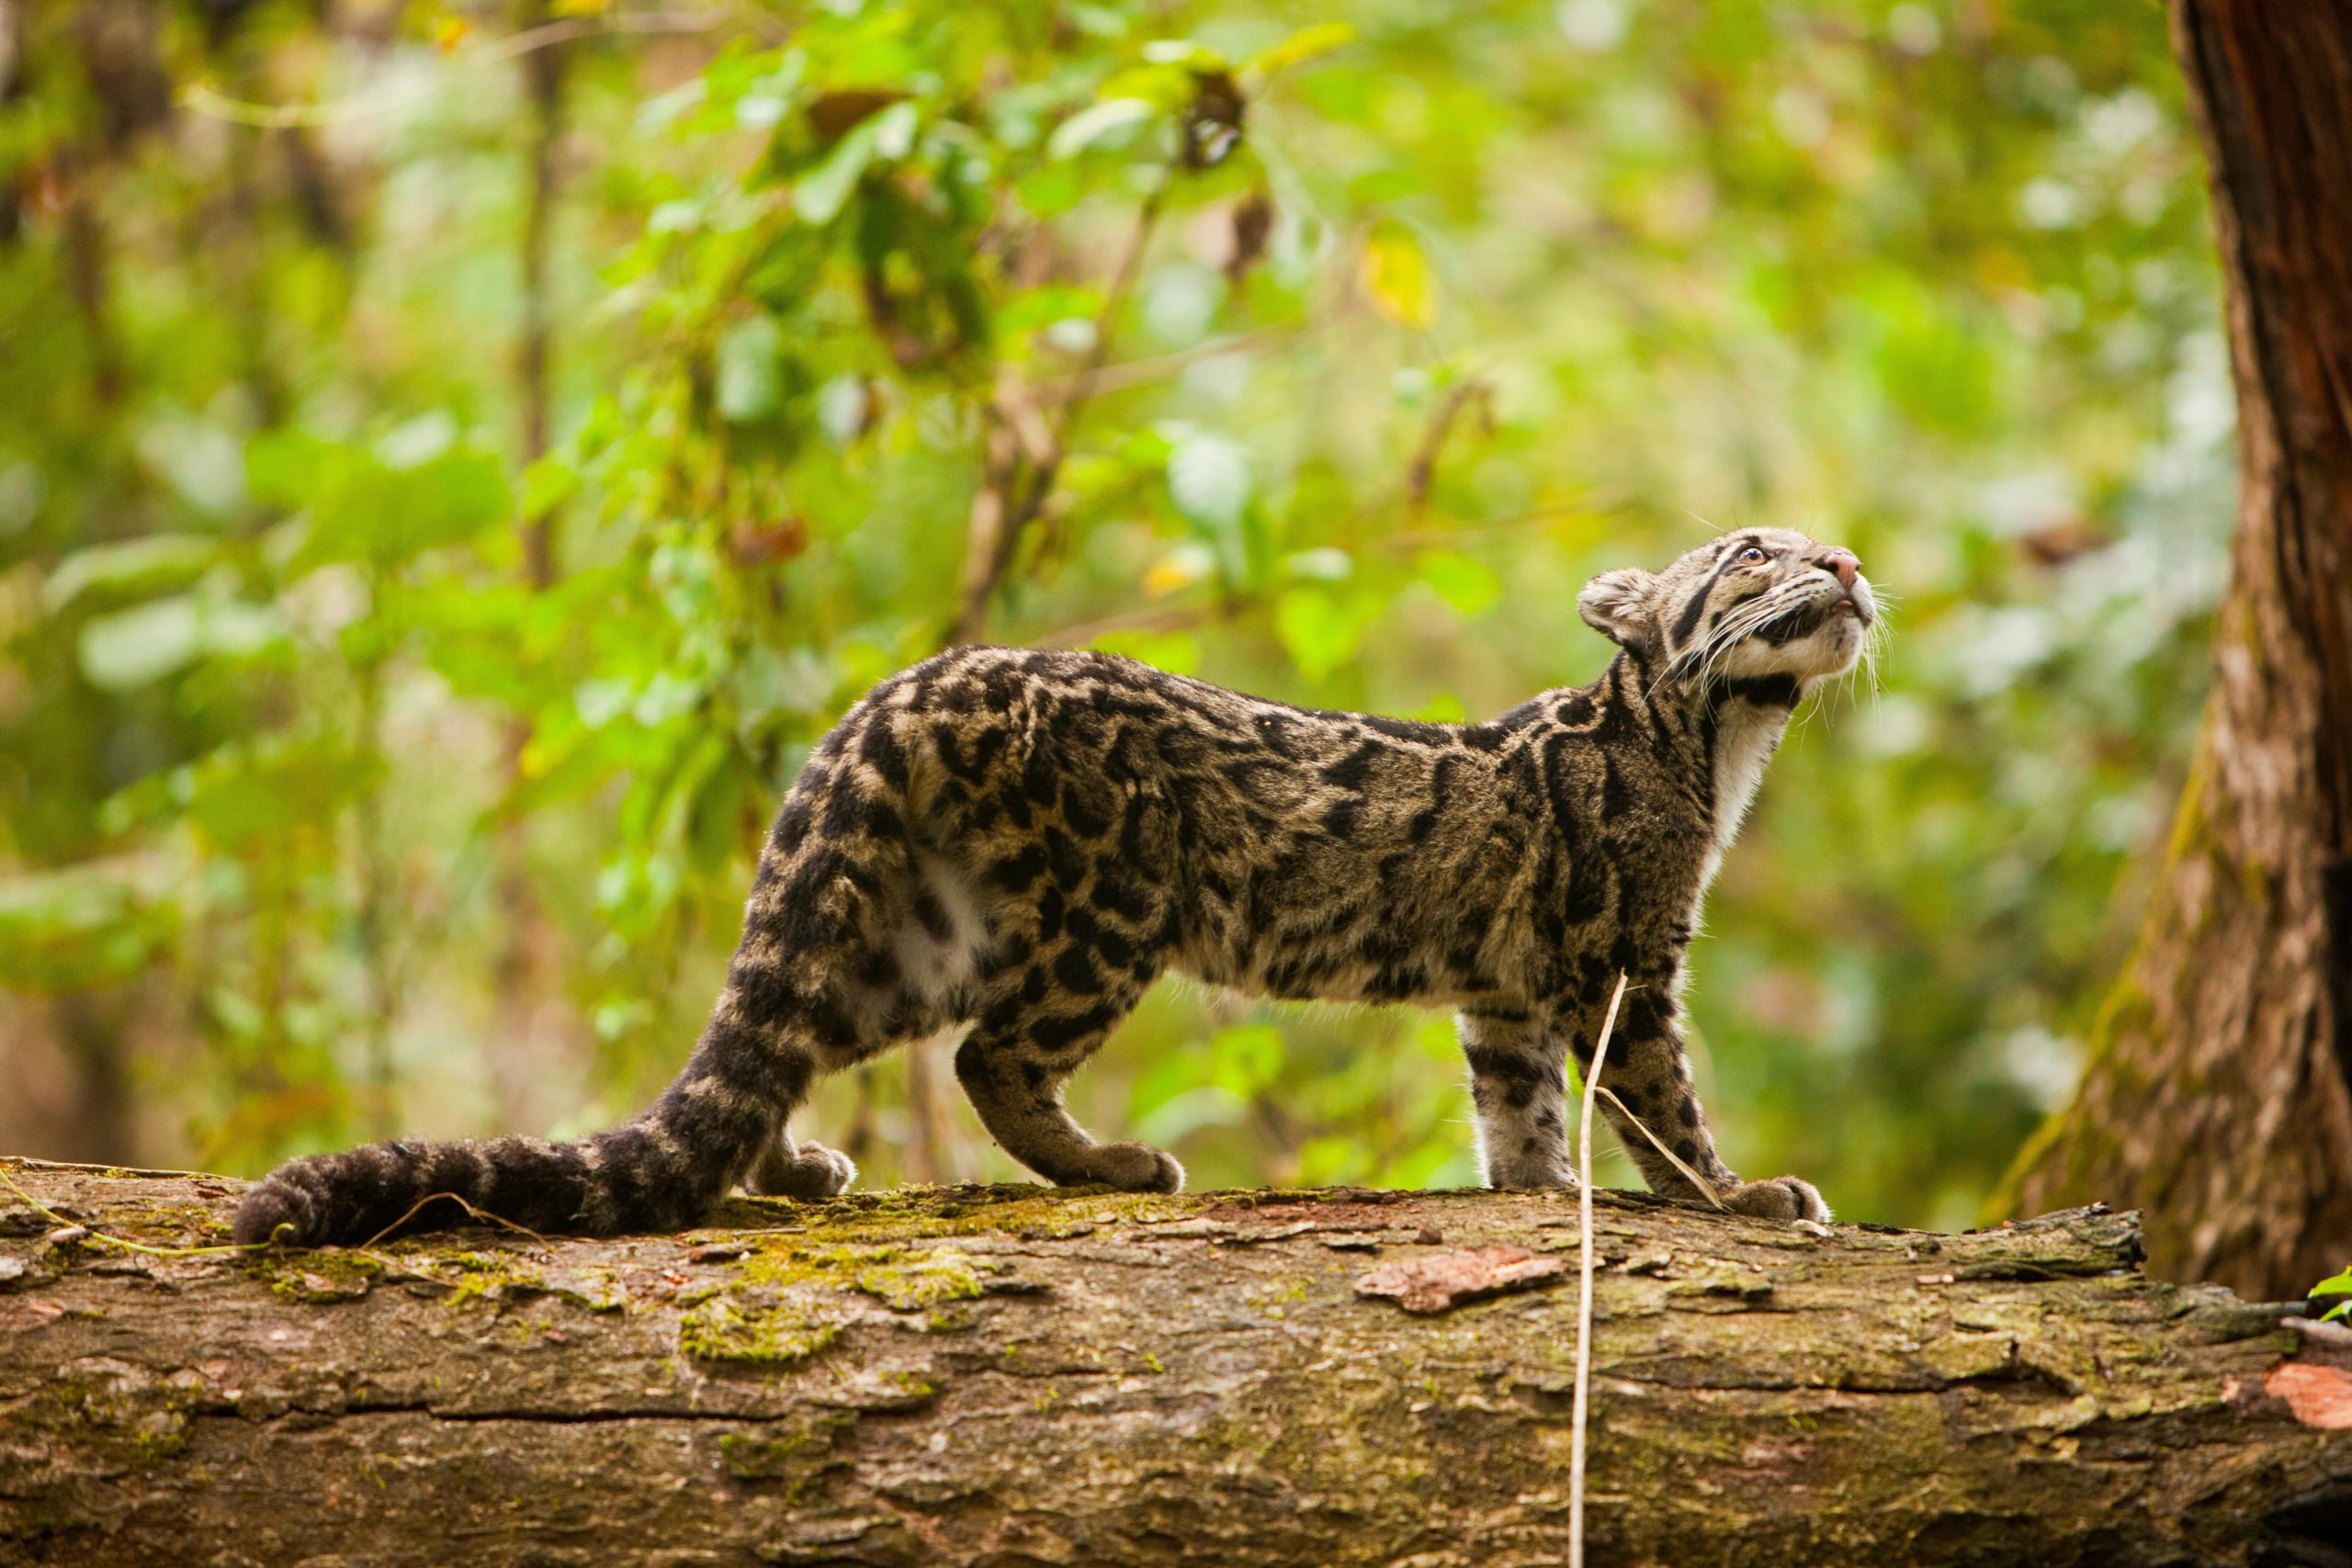 A clouded leopard that was relocated to Manas National Park, Assam (Image: Alamy)